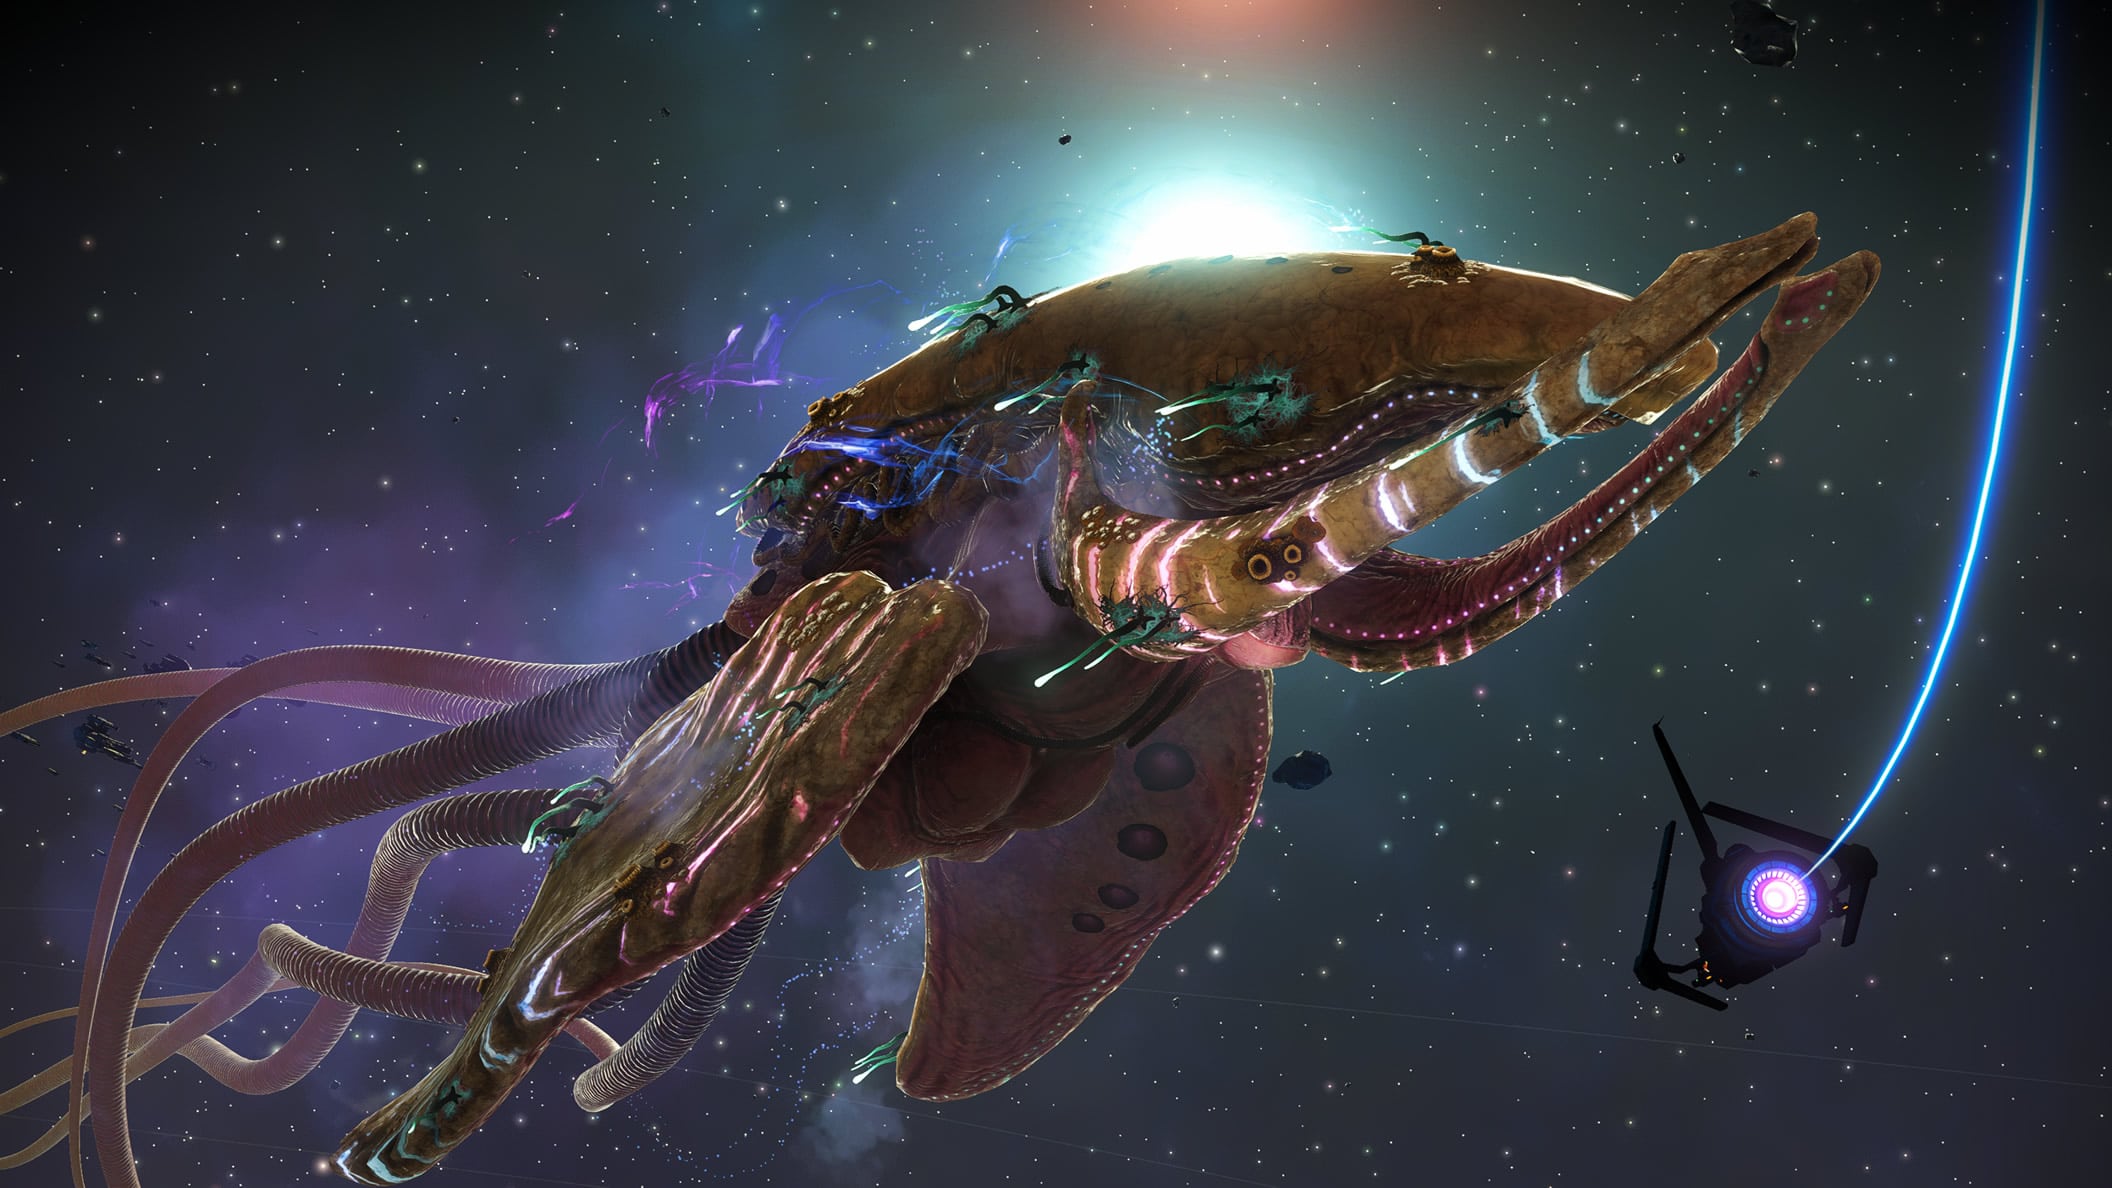 Leviathan, new update that will allow you to recruit leviathans